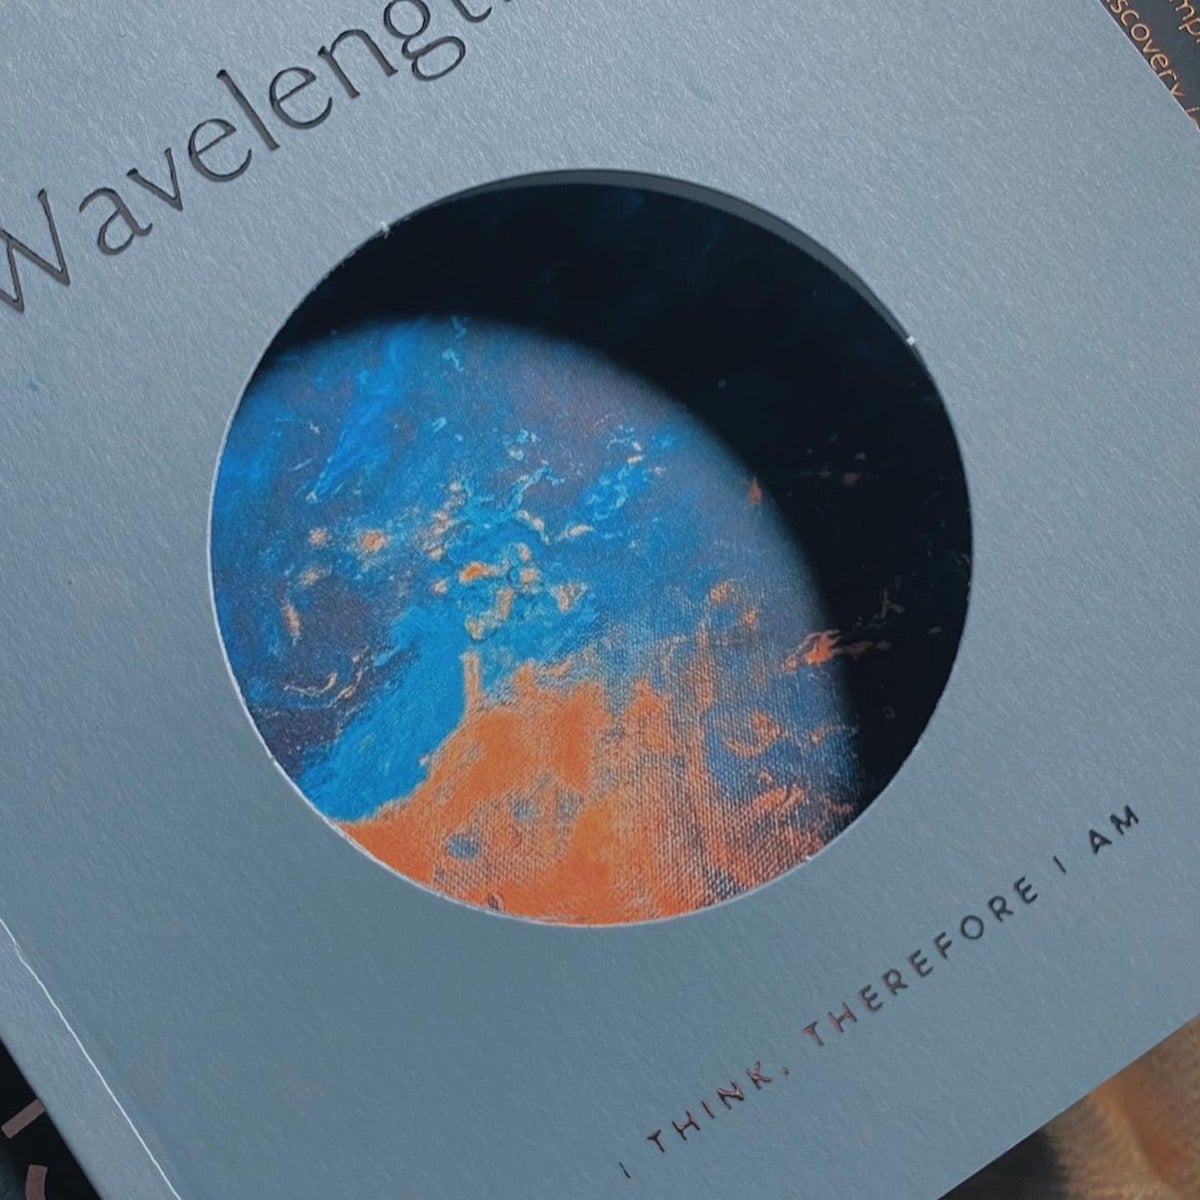 Artifact Uprising Color Series Photo Book titled wavelengths showing glimpse of a painting through the peek-through cover